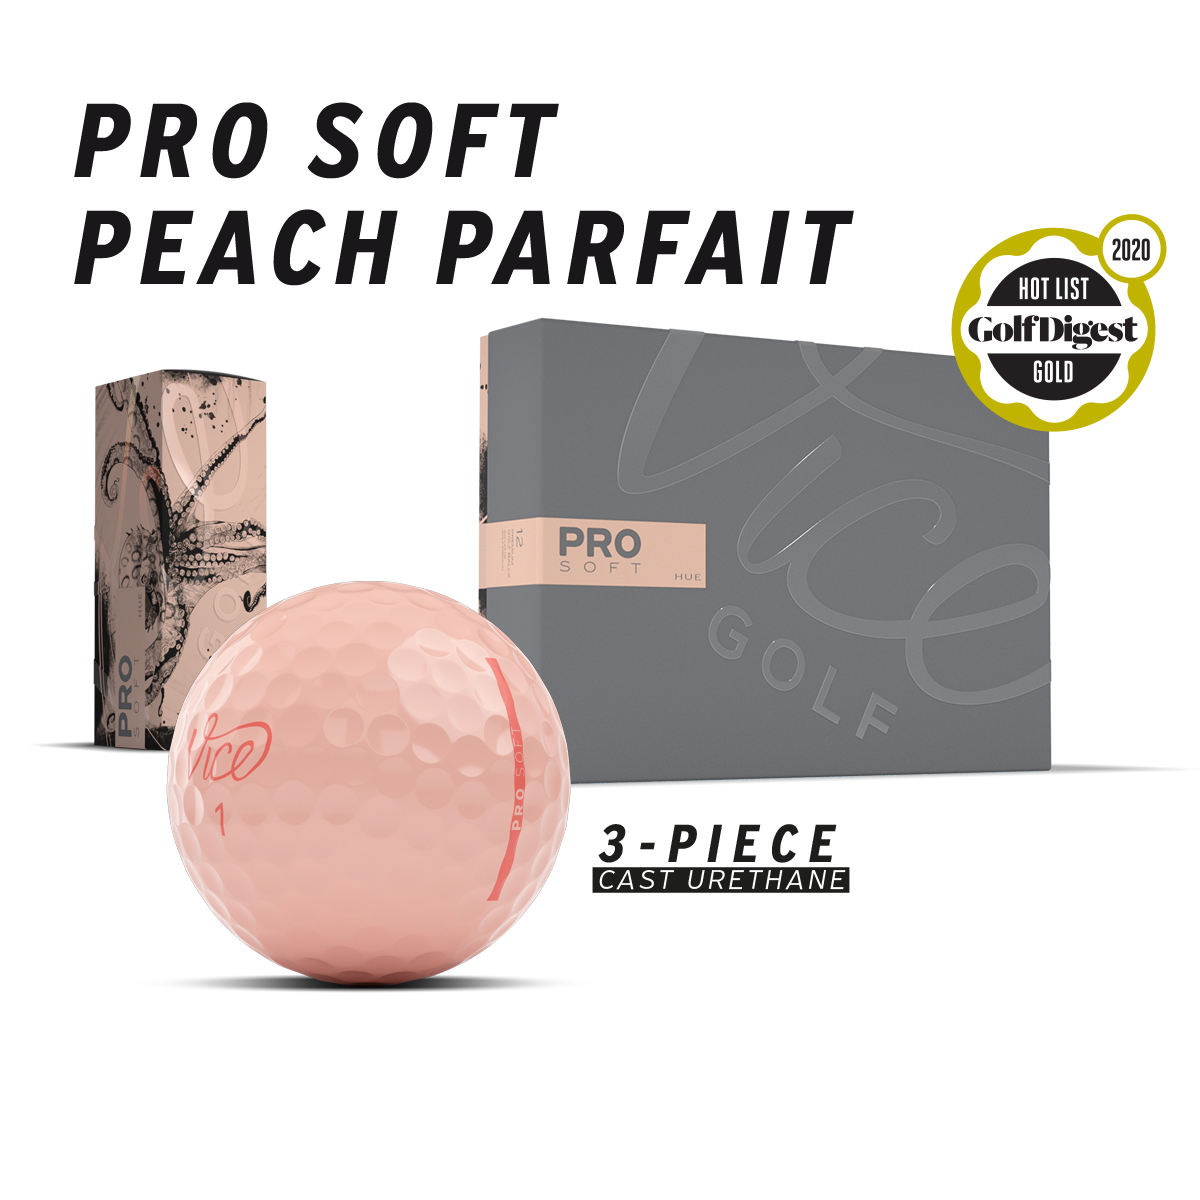 Pro Soft Peach package